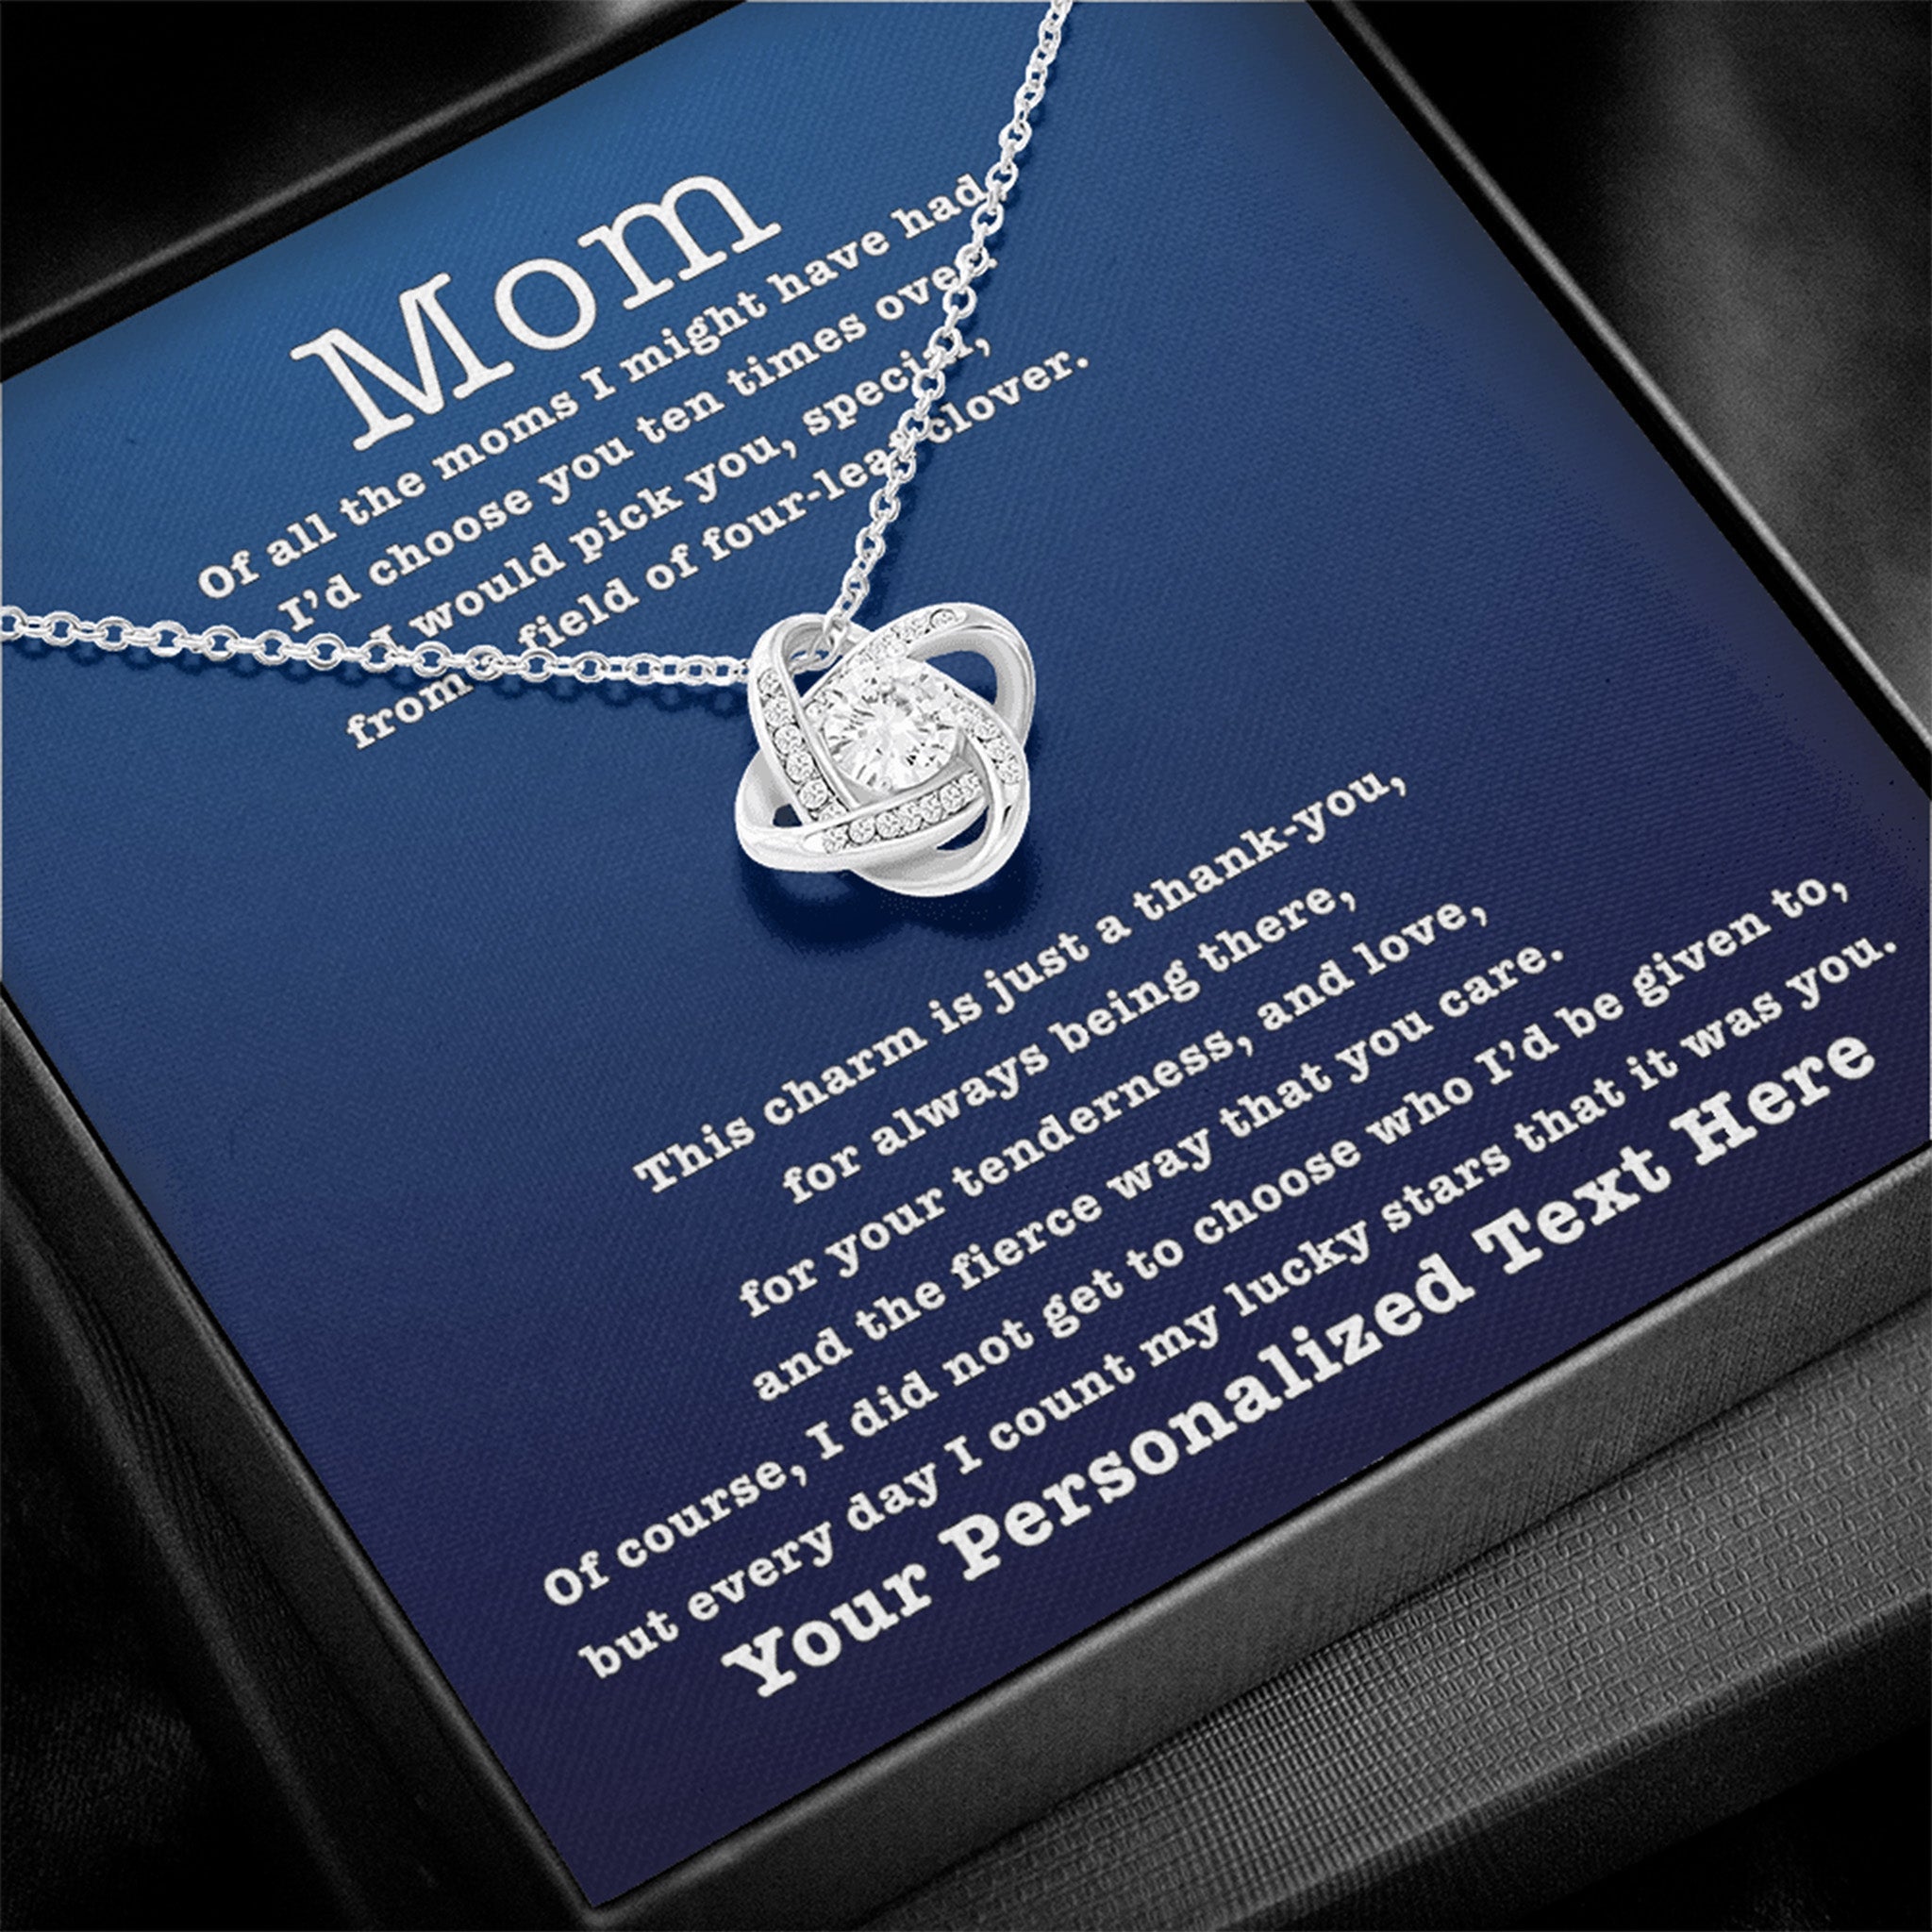 Love Knot Necklace Mom I Count My Lucky Stars Personalized Insert Card (blue)Customly Gifts